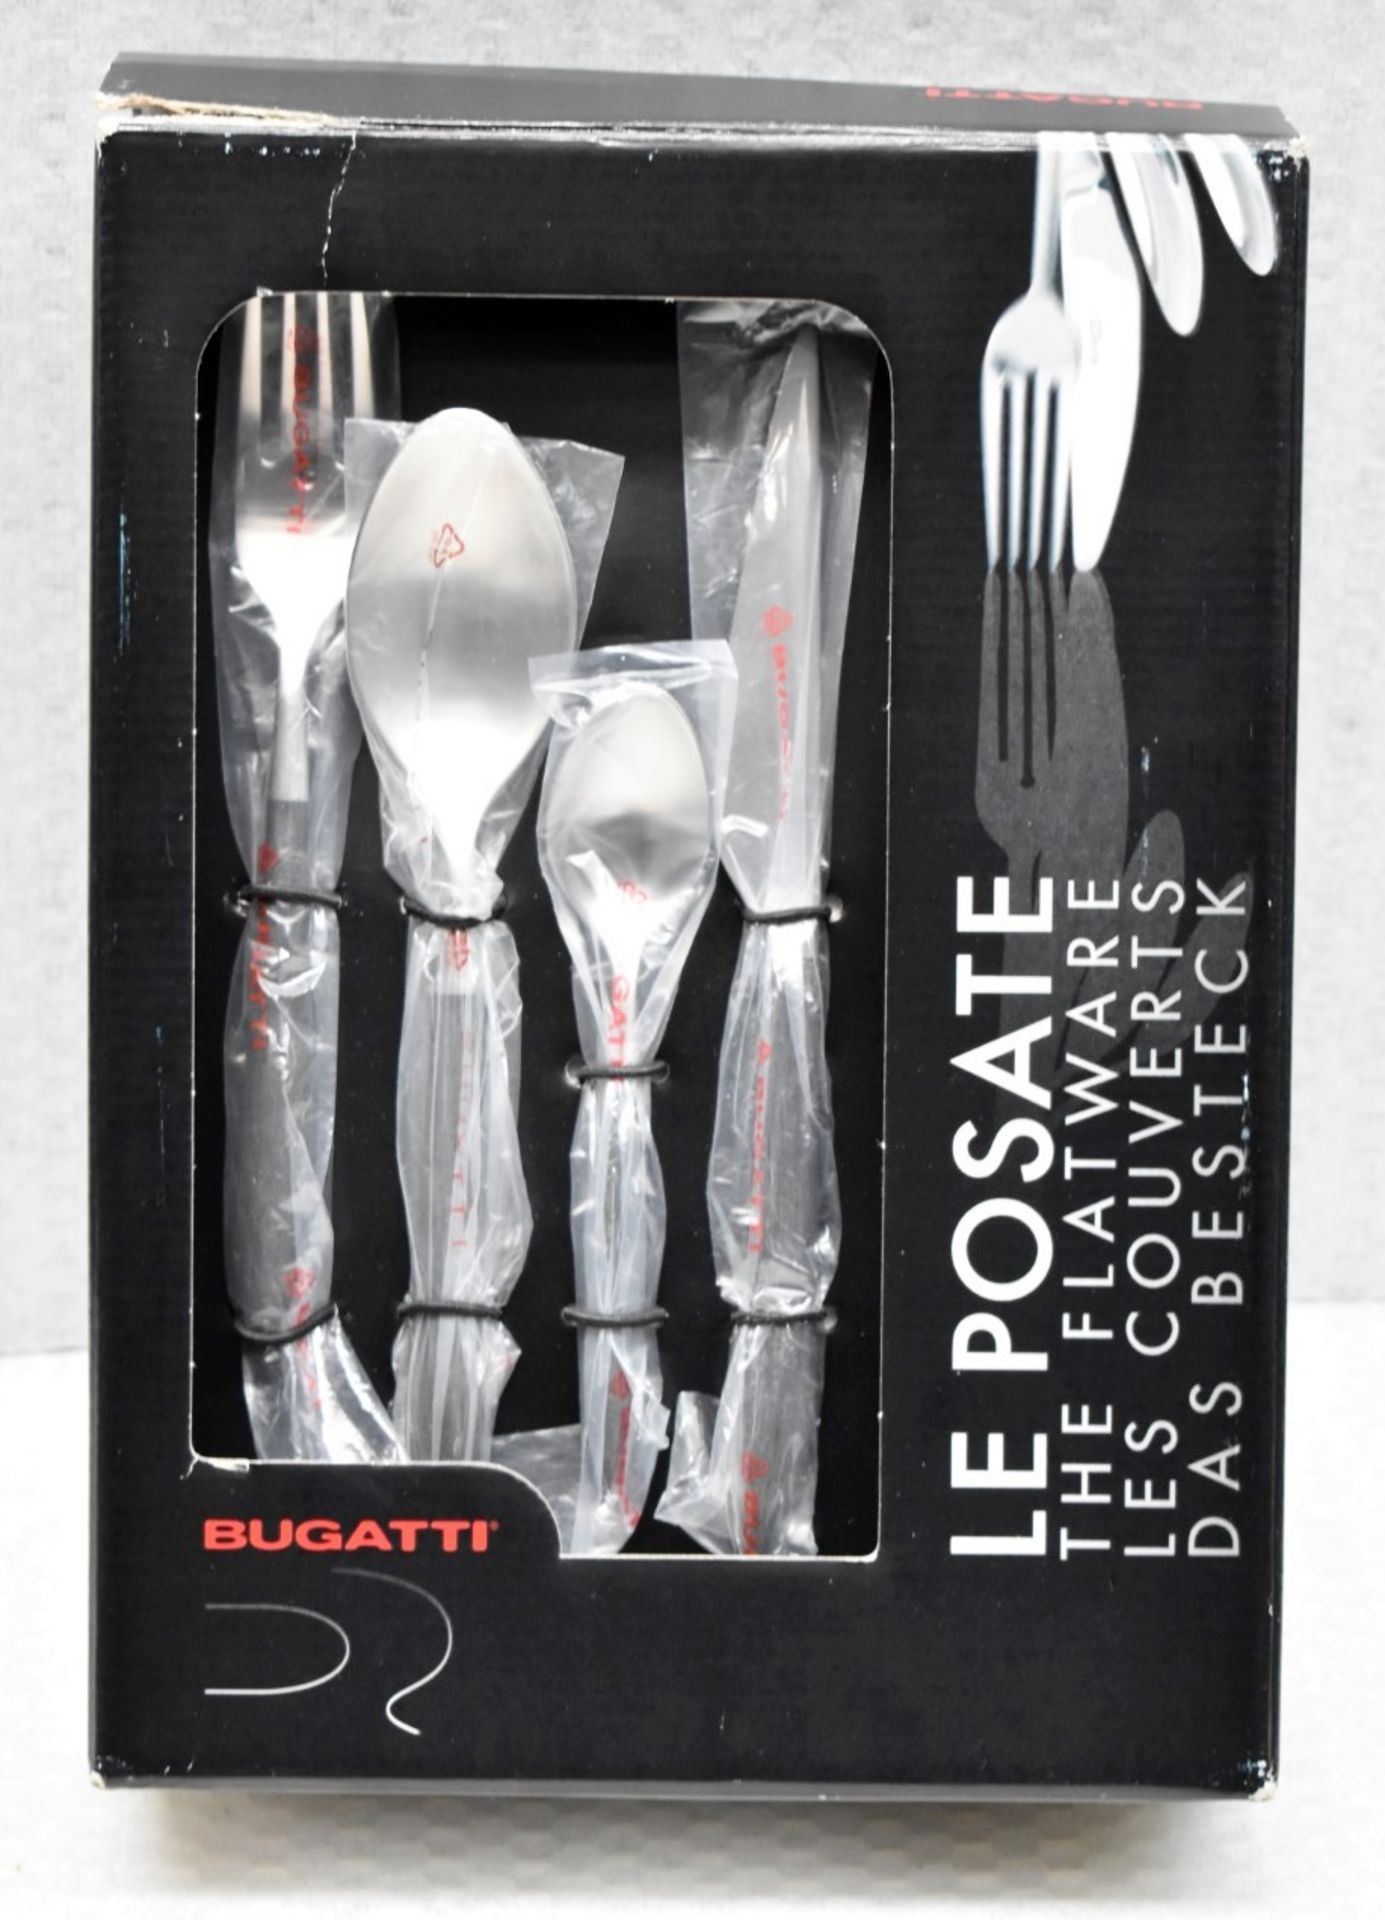 1 x BUGATTI 'Ares' Stainless Steel 24-Piece Cutlery Set - RRP £299.99 - Boxed Stock - Image 2 of 10